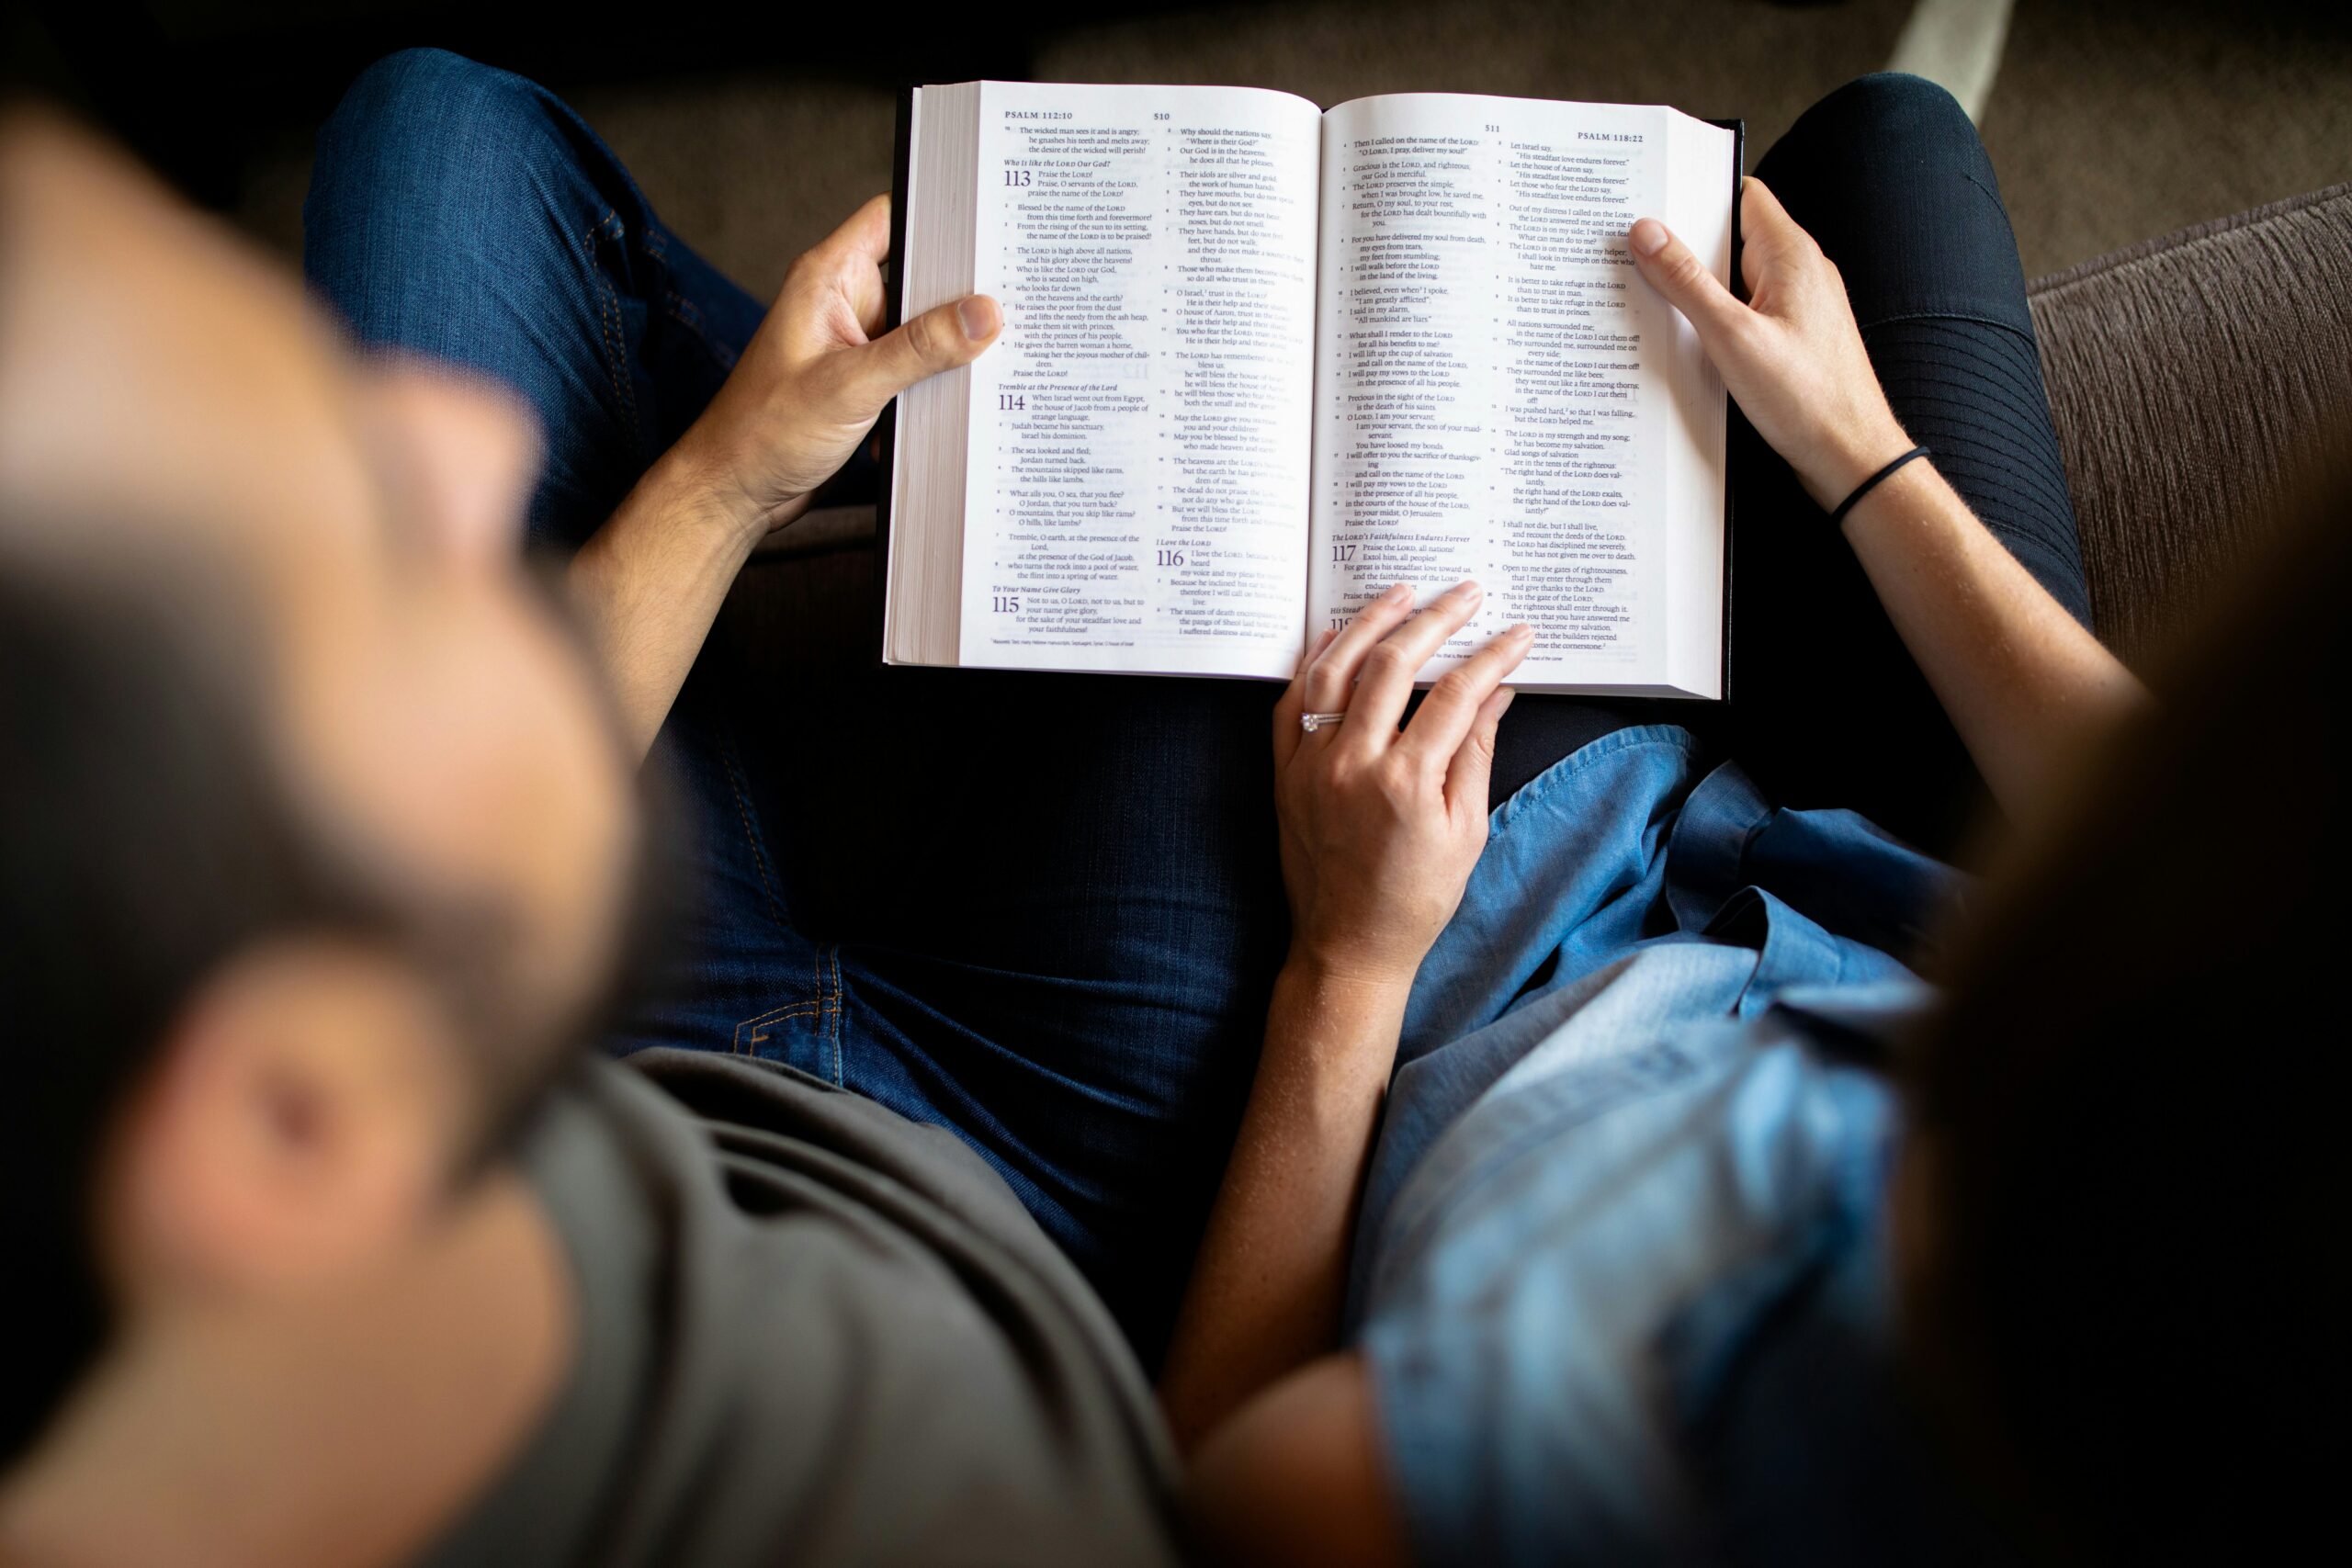 Husband and wife reading the Bible together